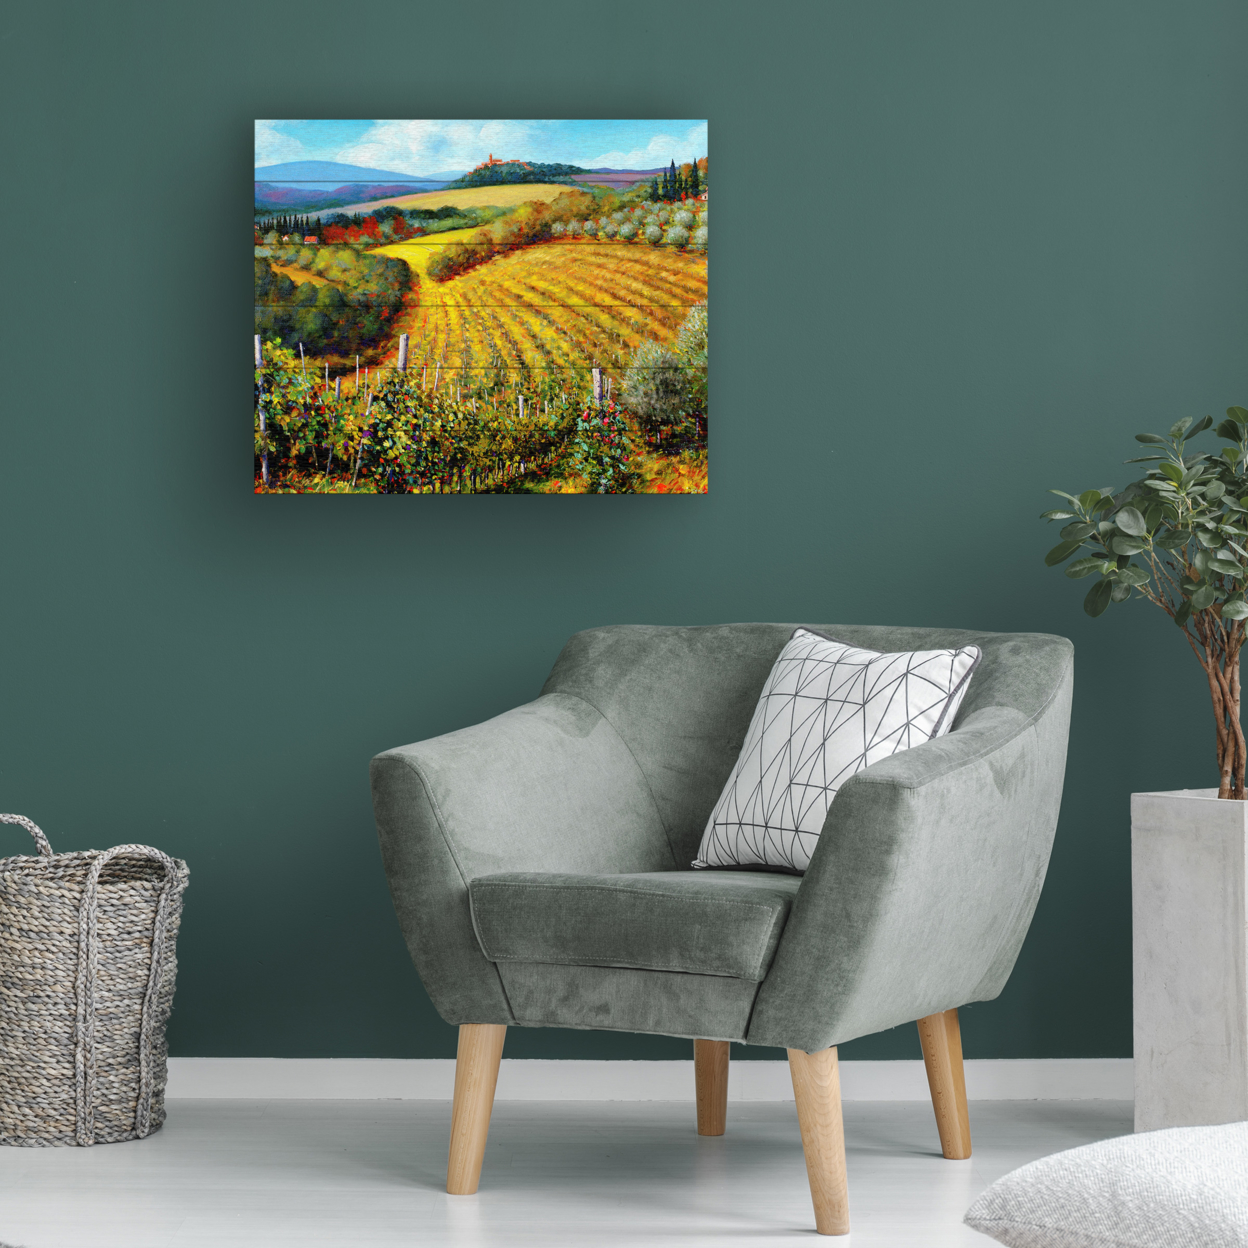 Wooden Slat Art 18 X 22 Inches Titled Chianti Vineyards Ready To Hang Home Decor Picture